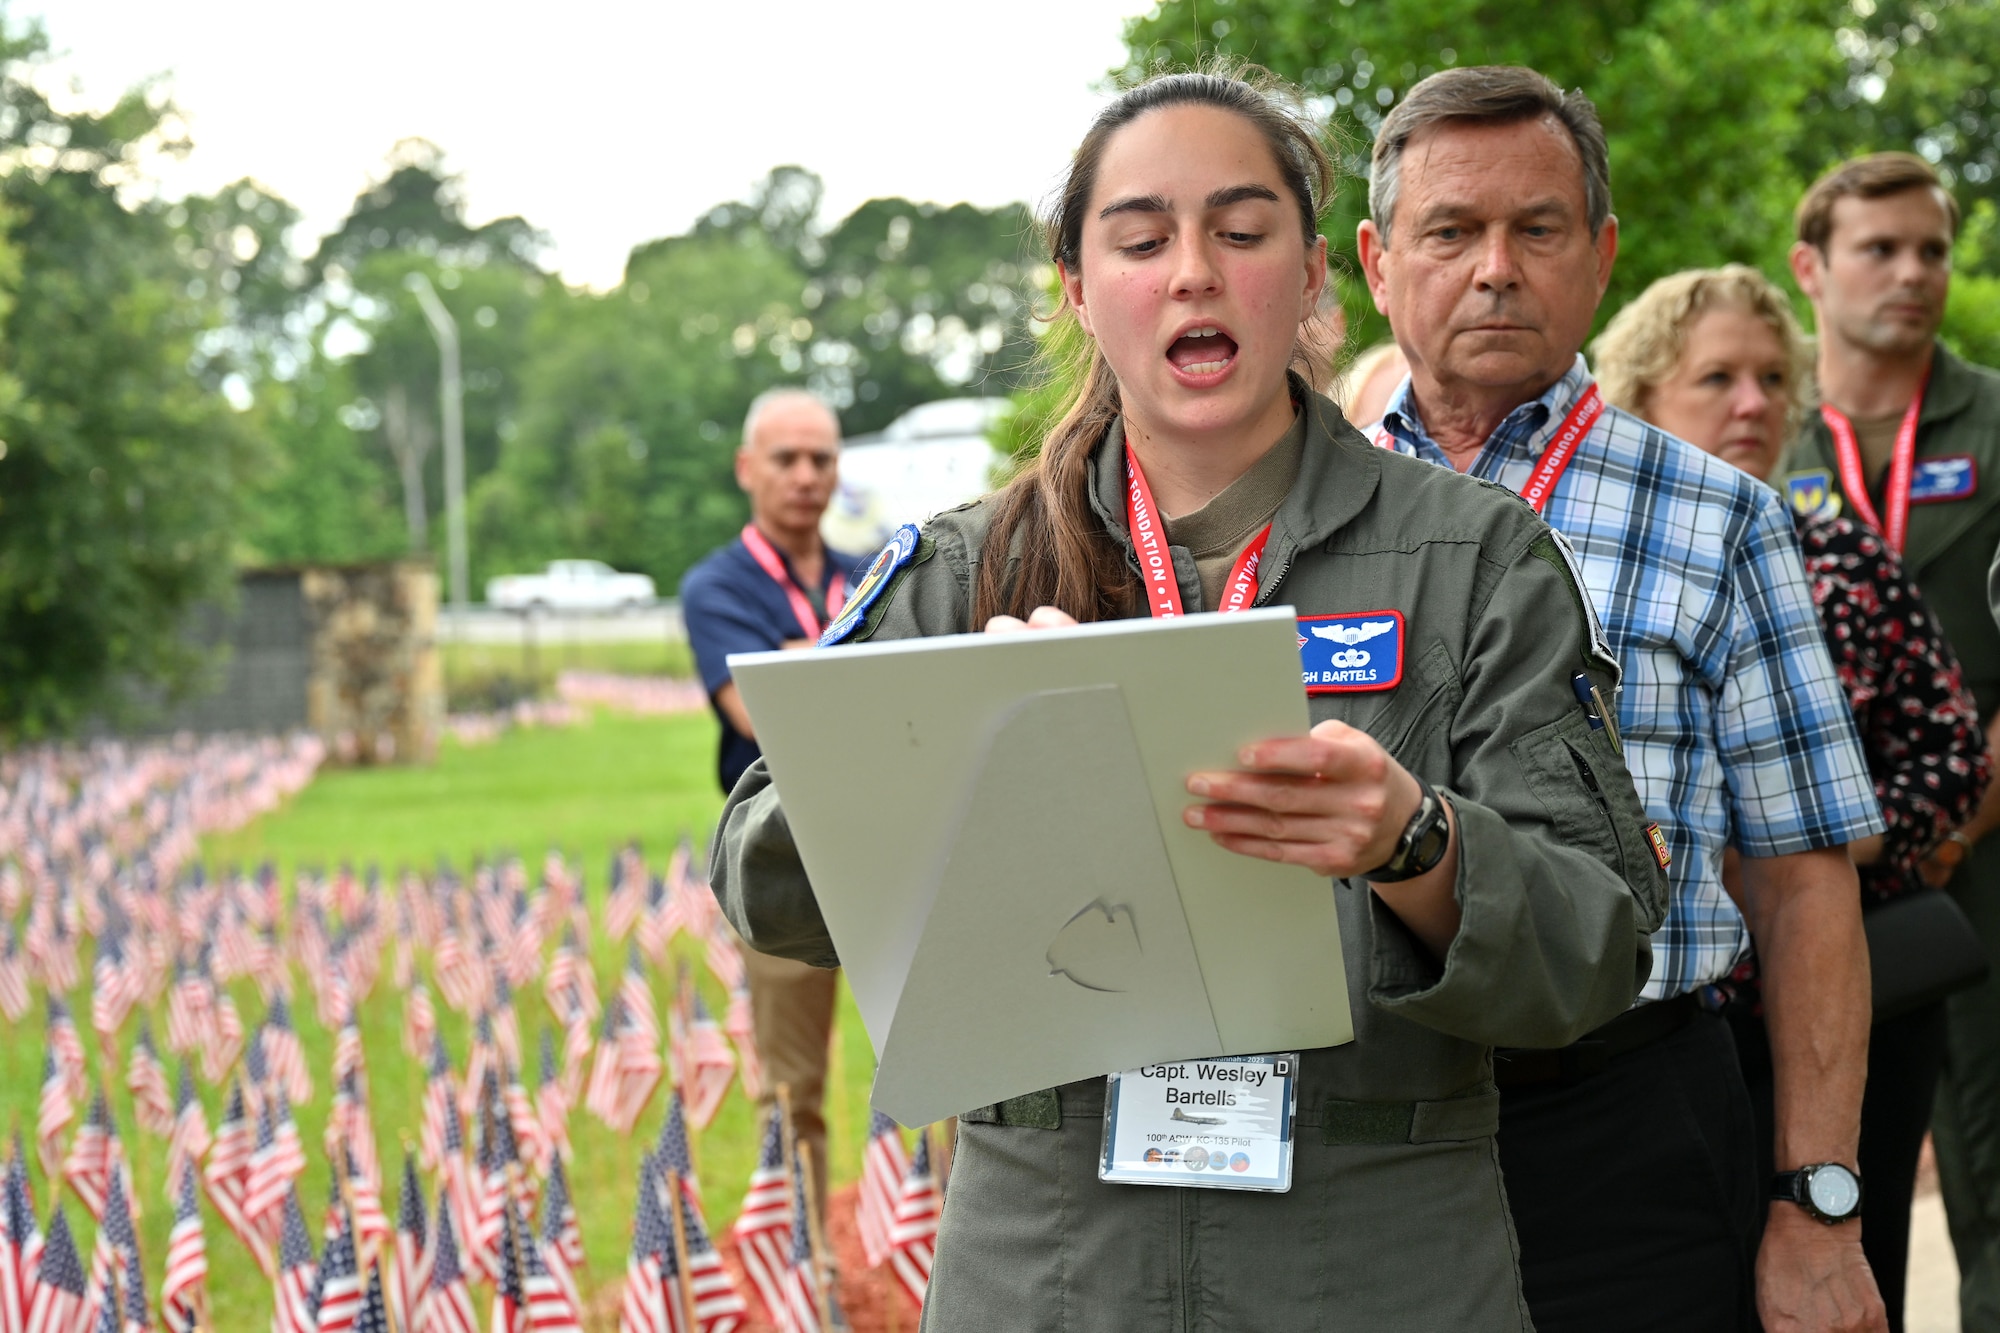 U.S. Air Force Capt. Wesleigh Bartells, 351st Air Refueling Squadron pilot, reads some of the 757 names of 100th Bomb Group Airmen who were lost during World War II, at the Flags for the Fallen ceremony during the 100th Bomb Group reunion, National Museum of the Mighty Eighth Air Force, Savanna, Georgia, May 25, 2023. Airmen from Royal Air Force Mildenhall, volunteers from the 100th Bomb Group Memorial Museum at Thorpe Abbotts, and hundreds of family members of 100th BG veterans, all placed flags for the 757 Airmen from the 100th Bomb Group who never returned home. The flags had 48 stars to represent the flag under which the veterans served during World War II. (U.S. Air Force photo by Karen Abeyasekere)